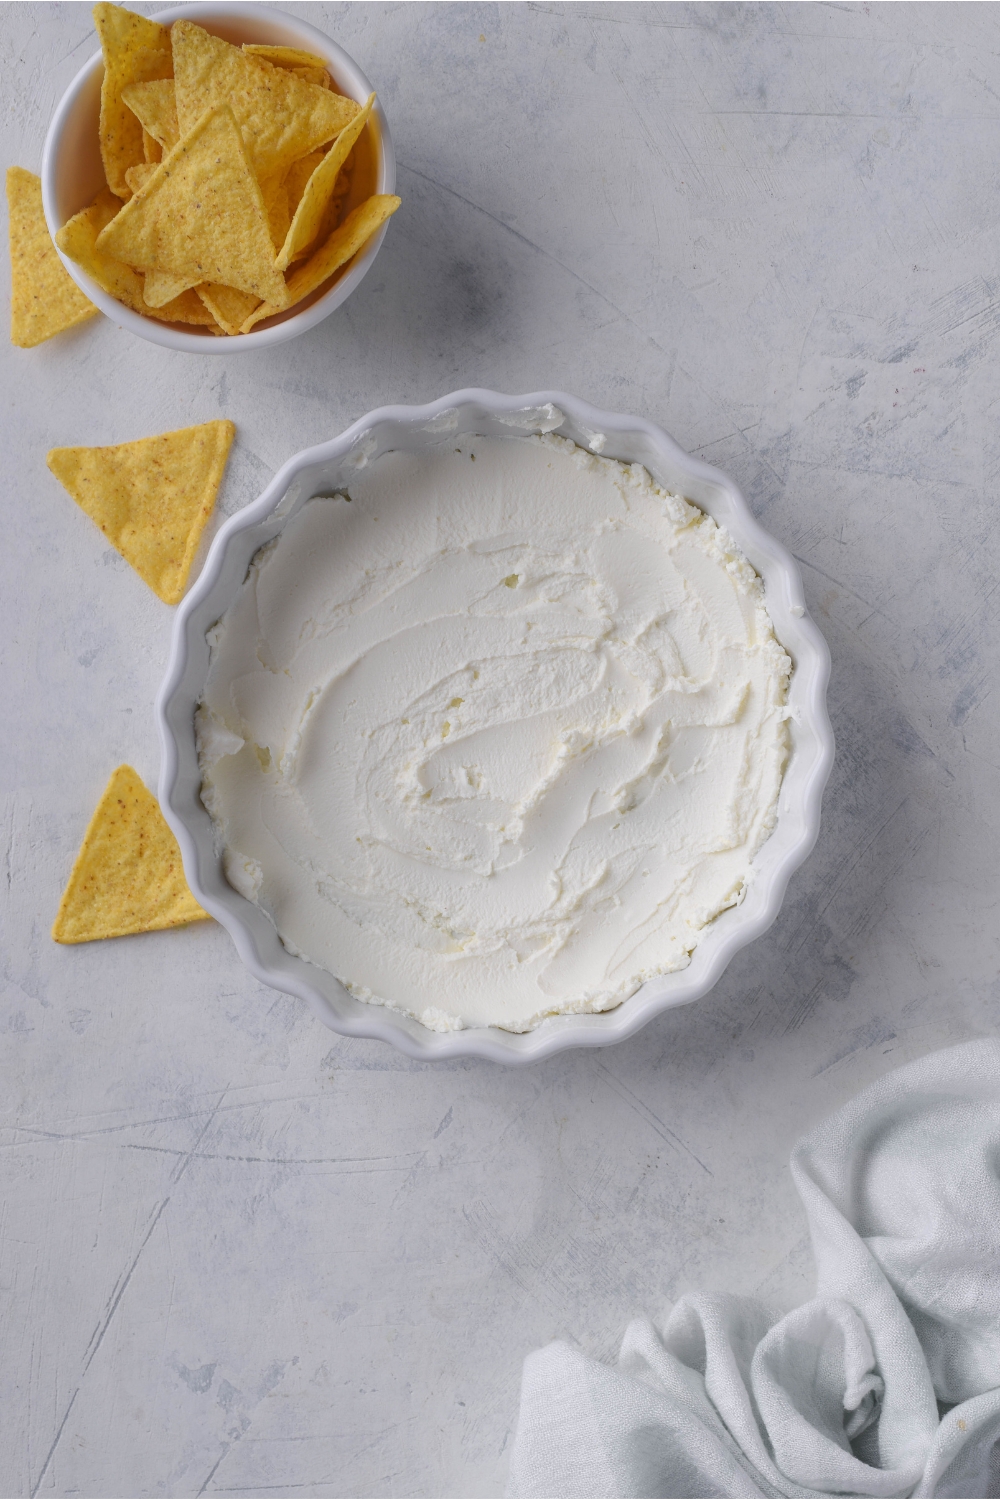 White serving dish with a smooth layer of cream cheese. Next to the bowl of chili dip is a smaller bowl of tortilla chips with some chips falling out onto the counter.